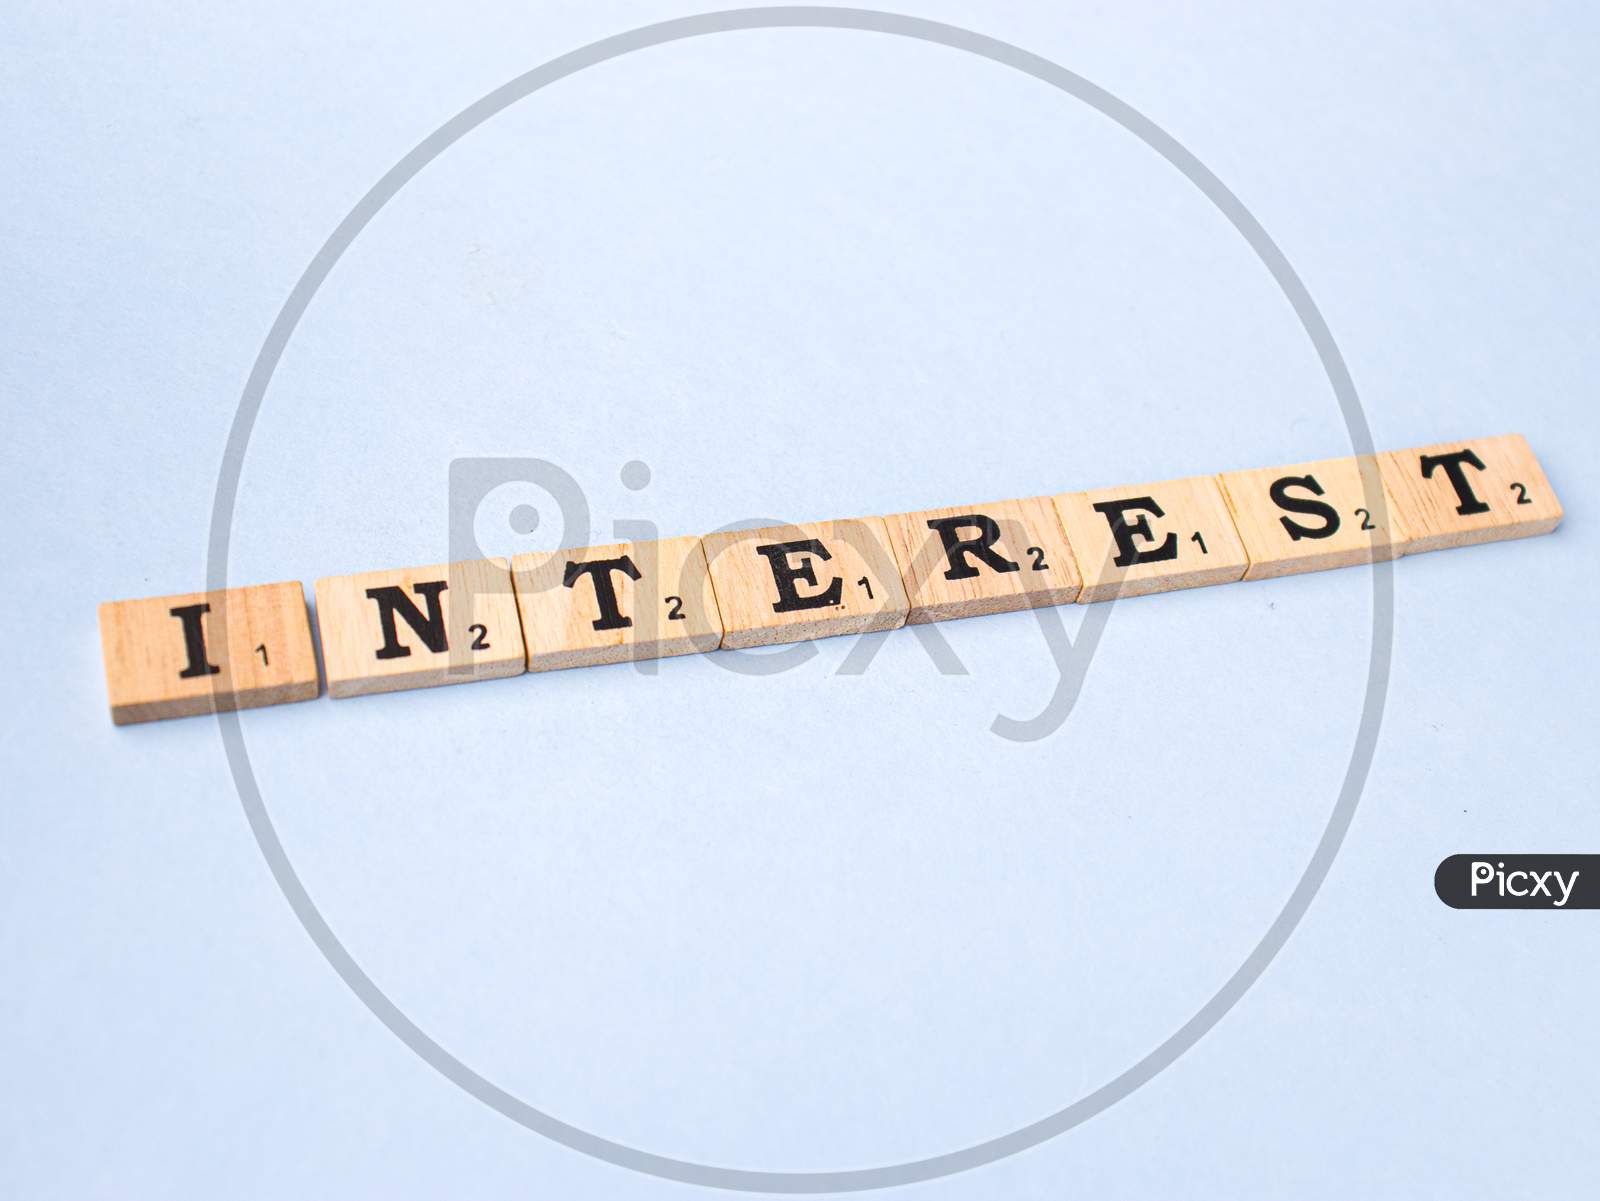 Assam, india - March 30, 2021 : Word INTEREST written on wooden cubes stock image.